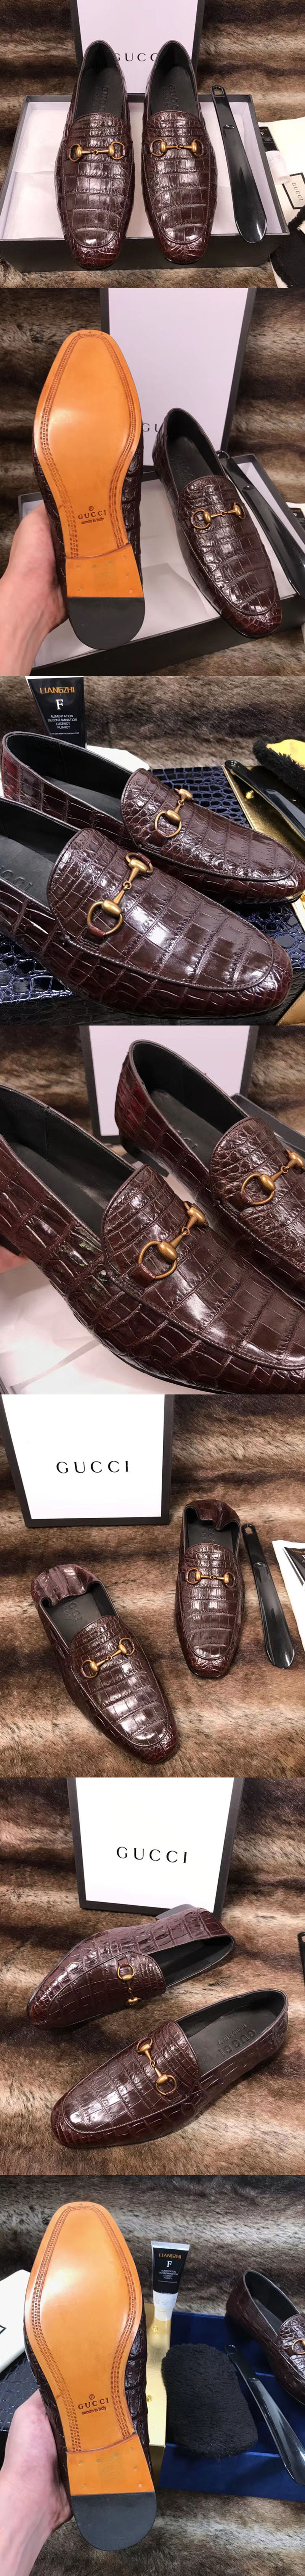 Replica Gucci 526297 Horsebit leather loafer and shoes Brown Real Crocodile Leather